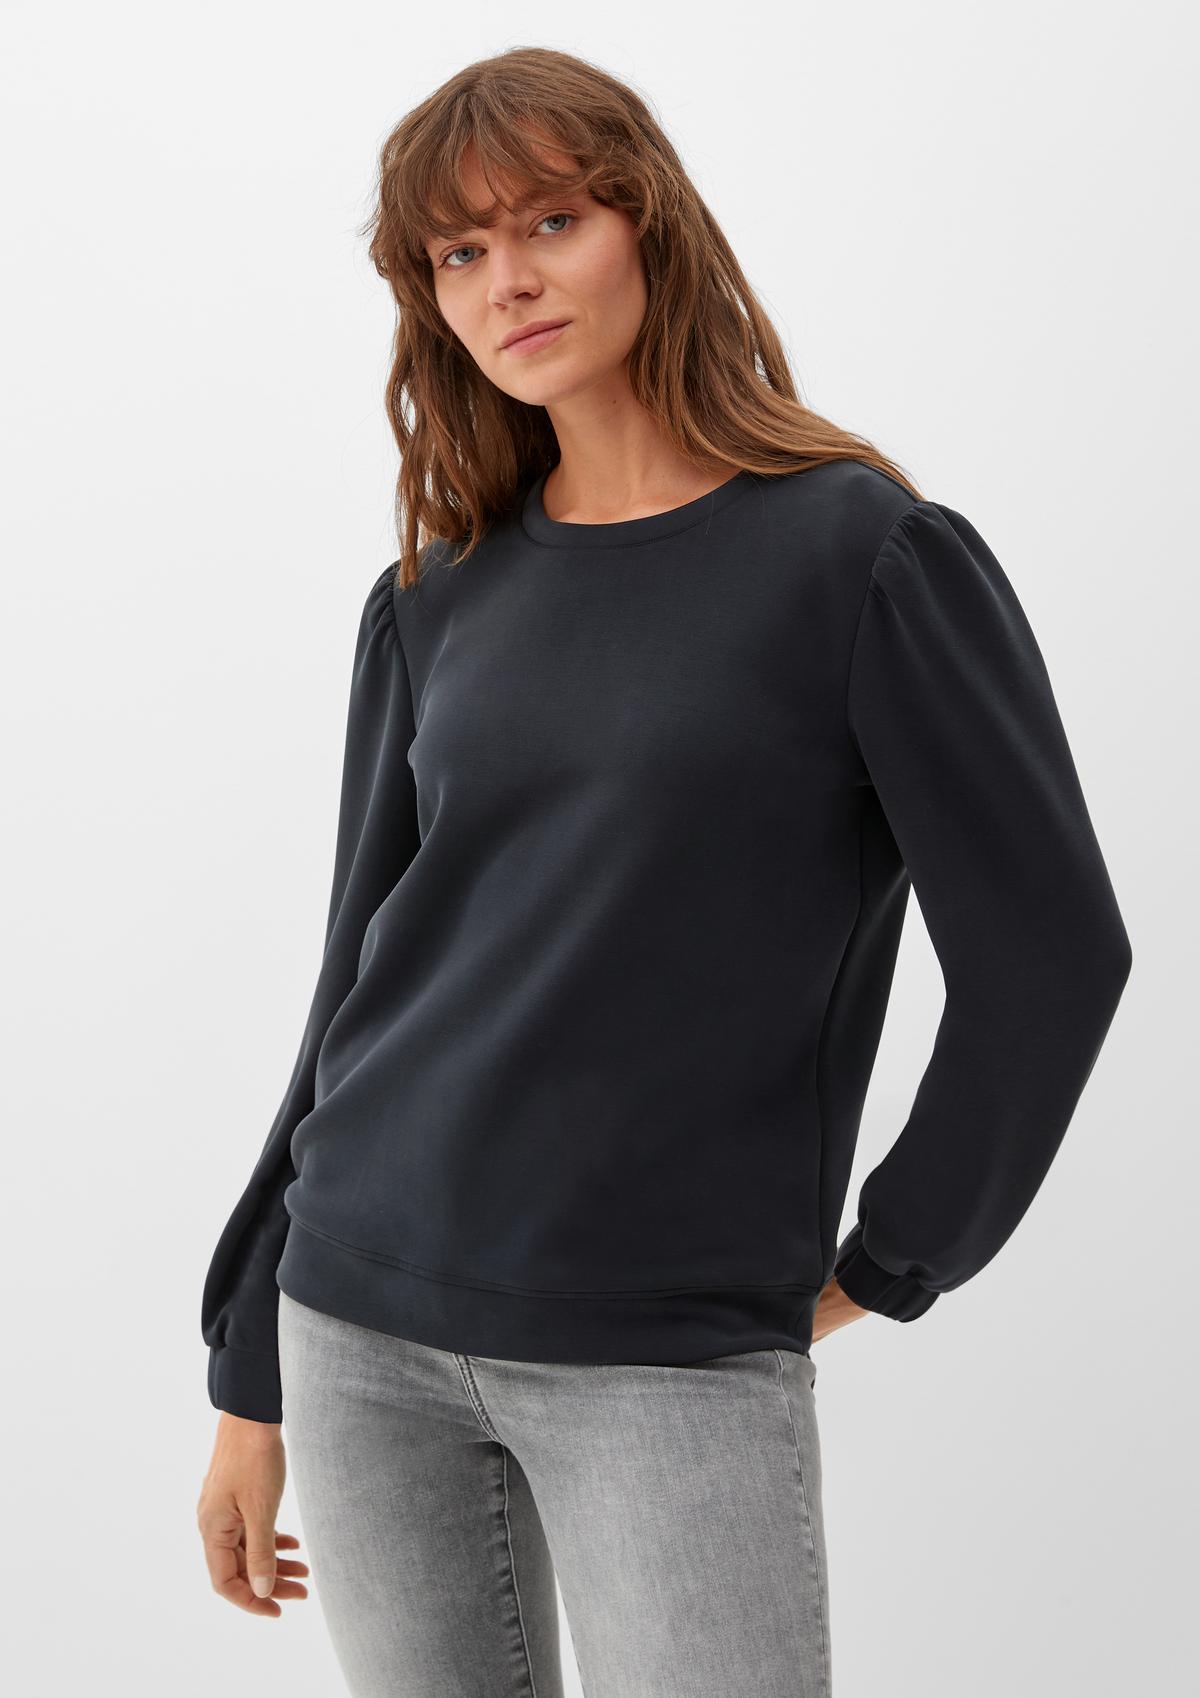 Long sleeve top - made navy stretch of cotton